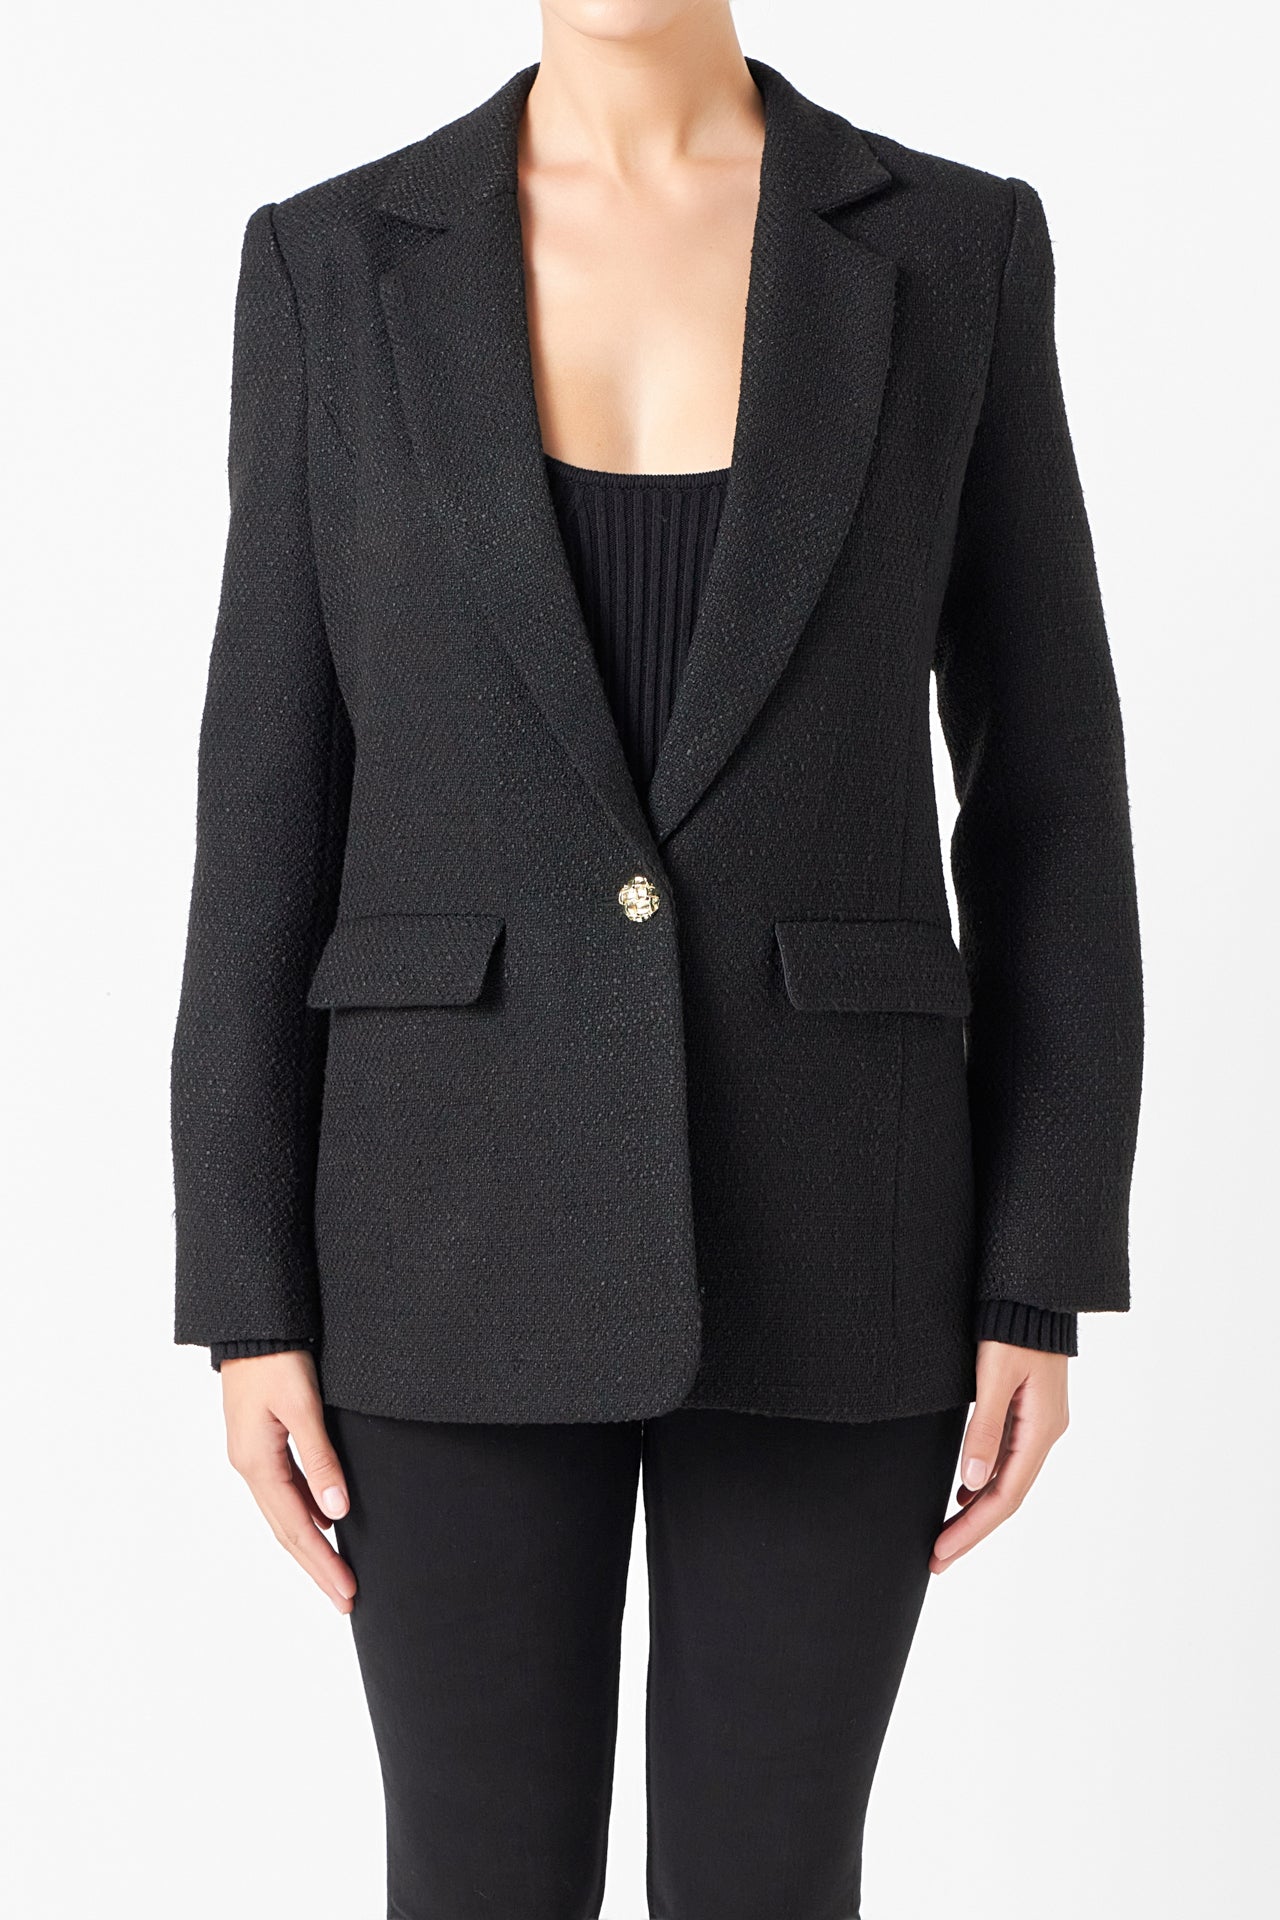 Endless Rose - Tweed Single Breast Blazer - Blazers in Women's Clothing available at endlessrose.com